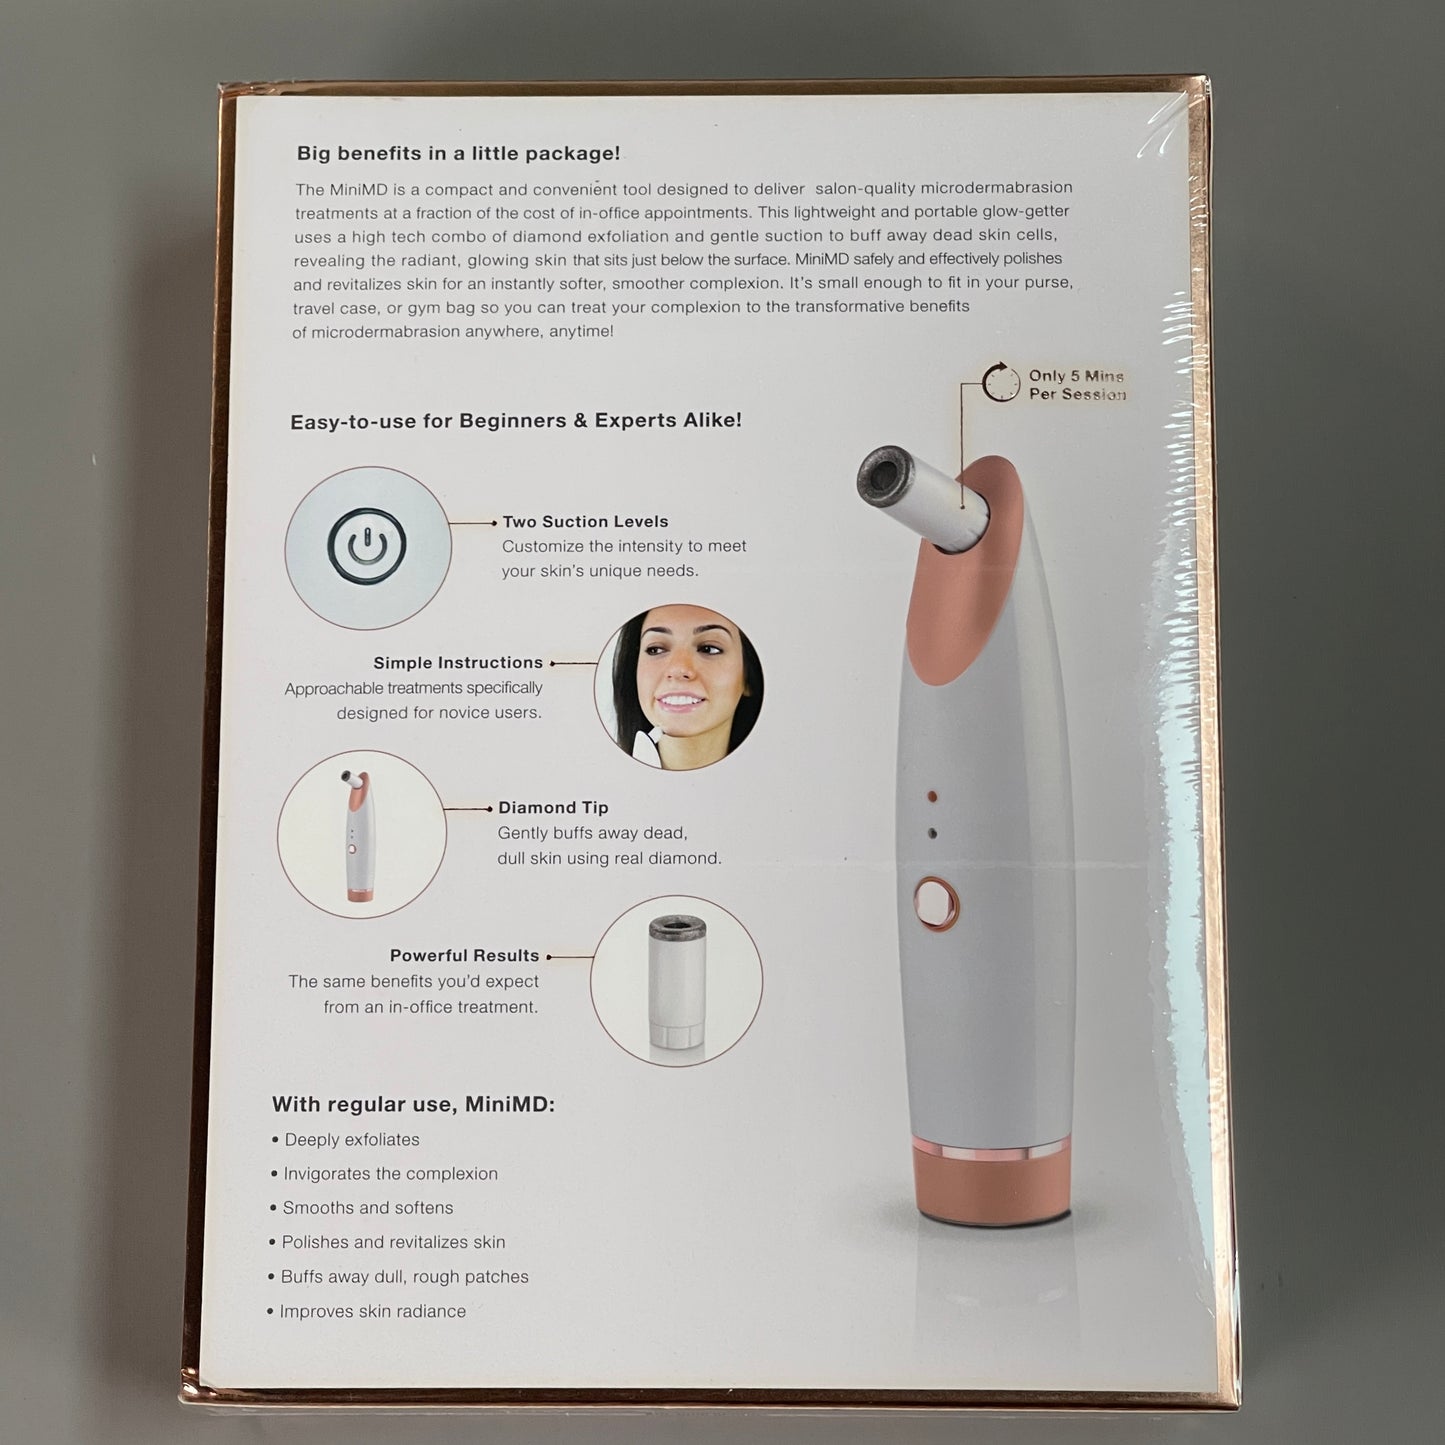 TROPHY SKIN Mini MD Portable Home Microdermabrasion System TSMINIMD White (New)